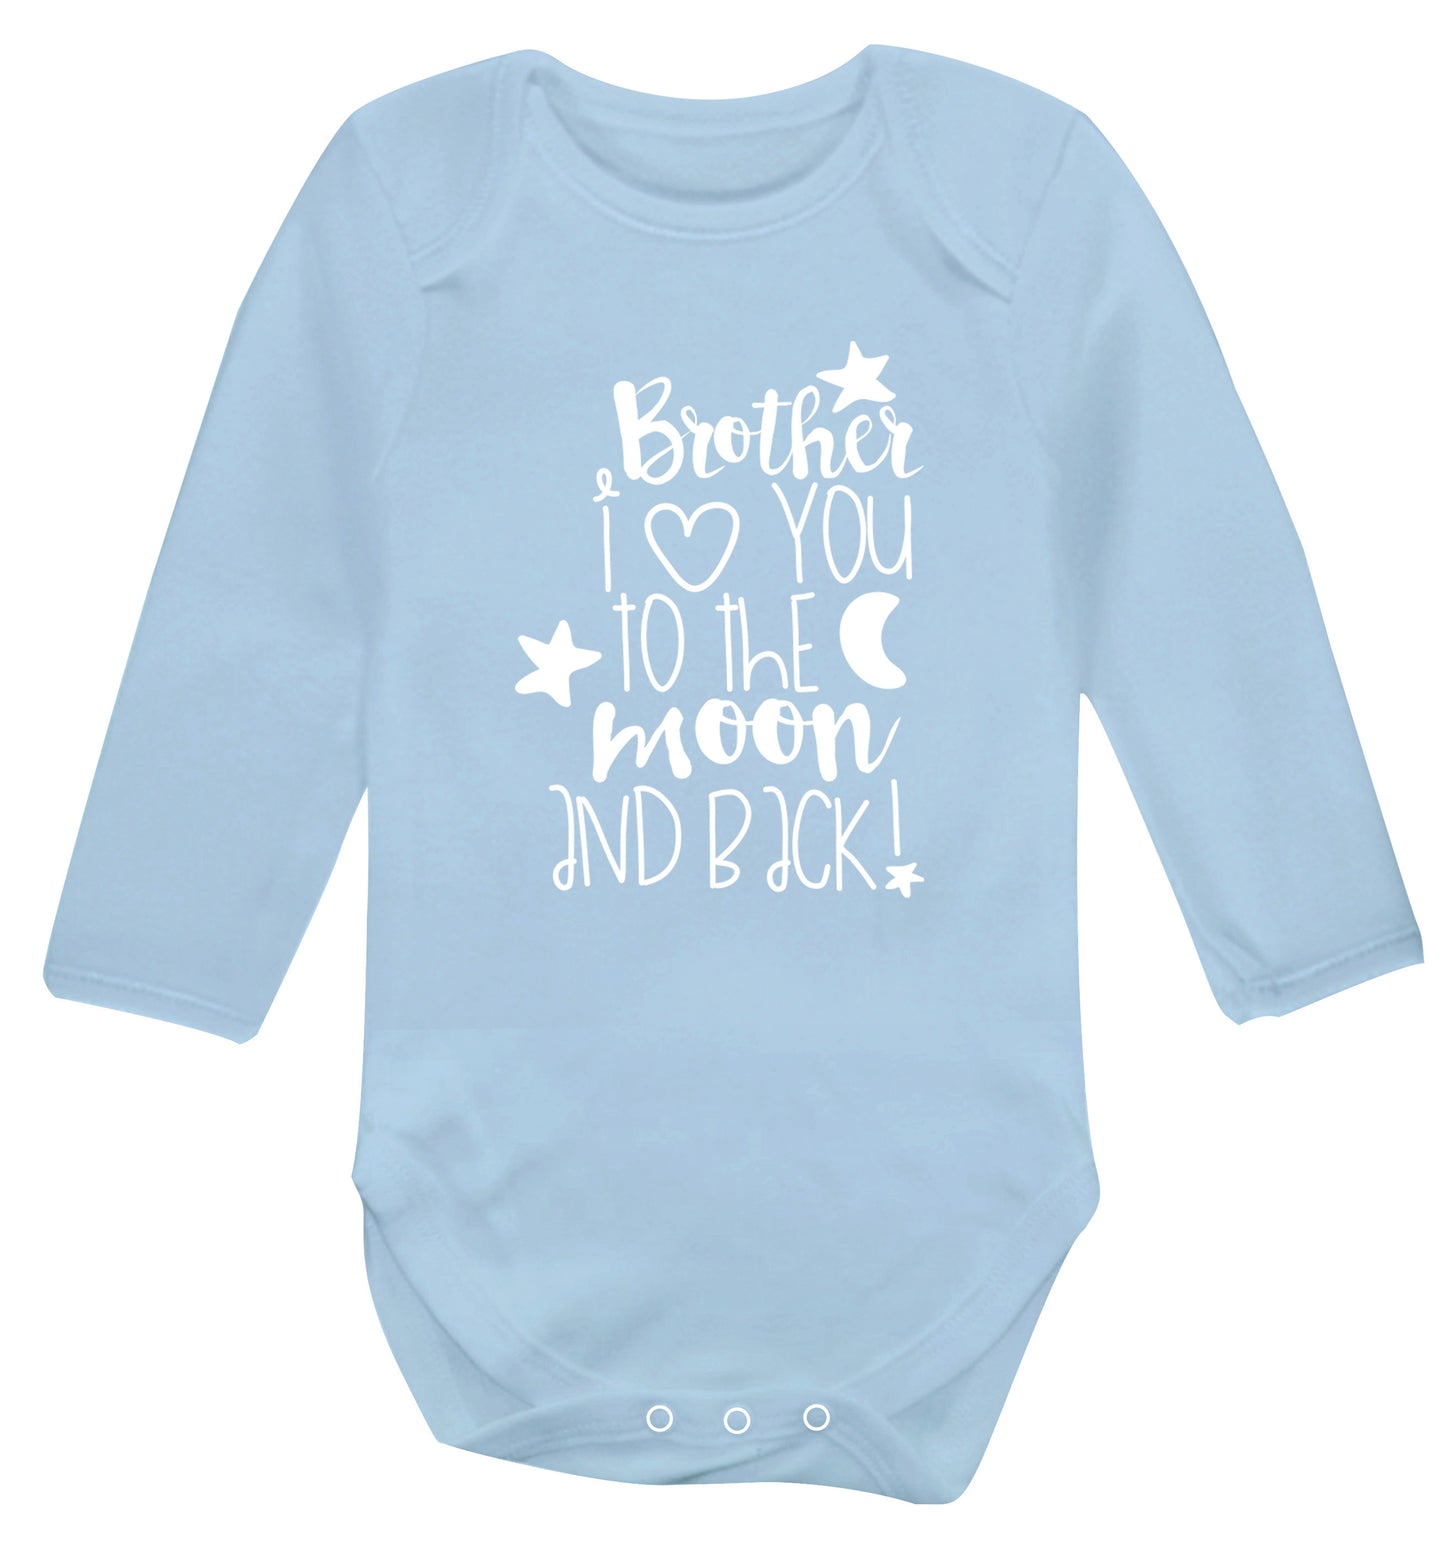 Brother I love you to the moon and back Baby Vest long sleeved pale blue 6-12 months